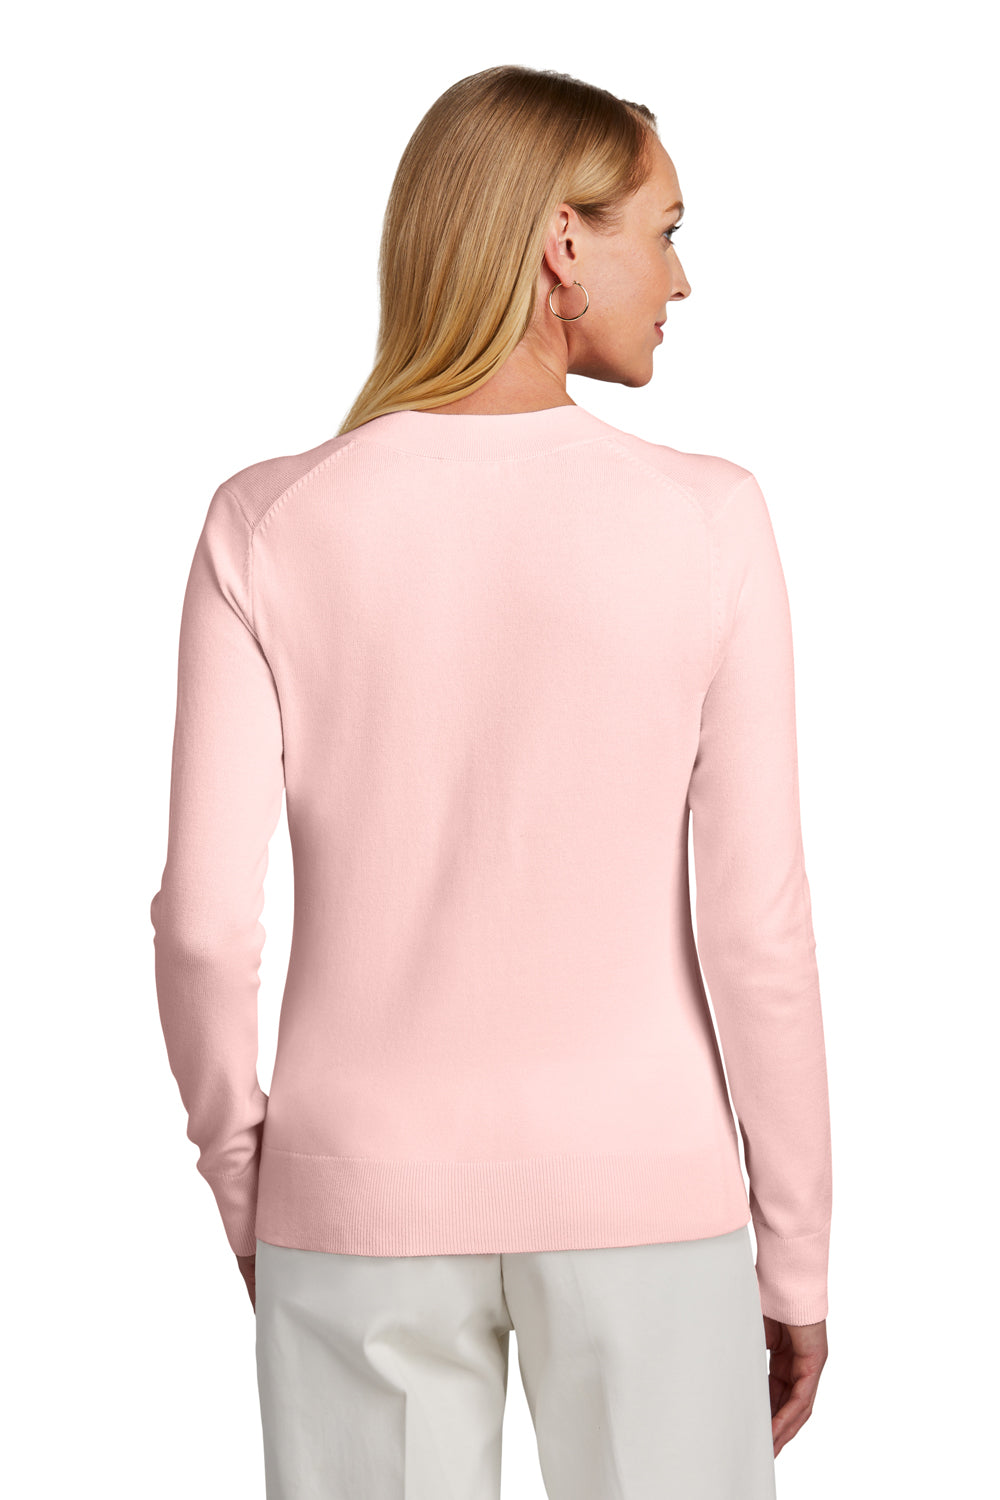 Brooks Brothers Womens Long Sleeve V-Neck Sweater Pearl Pink Model Back